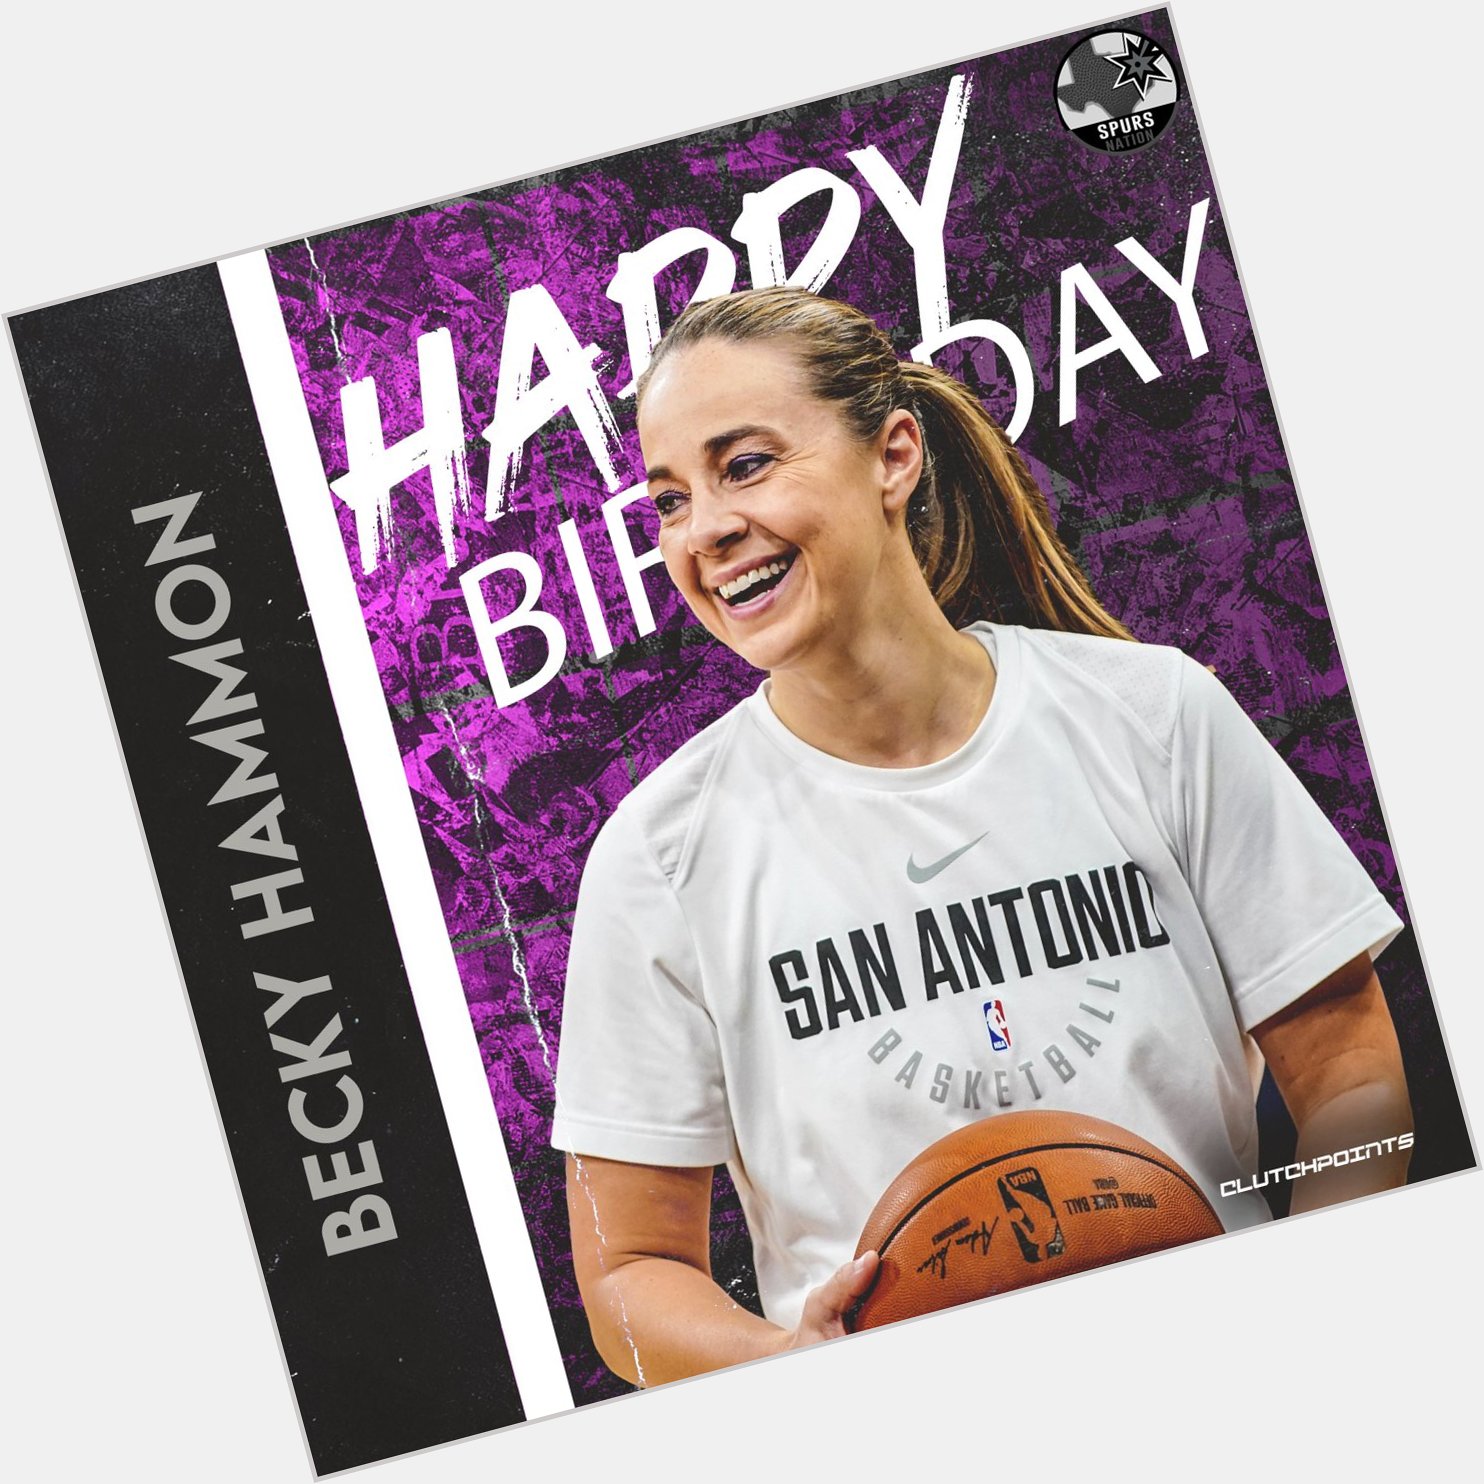 Join us as we greet assistant coach Becky Hammon a happy 45th birthday! 